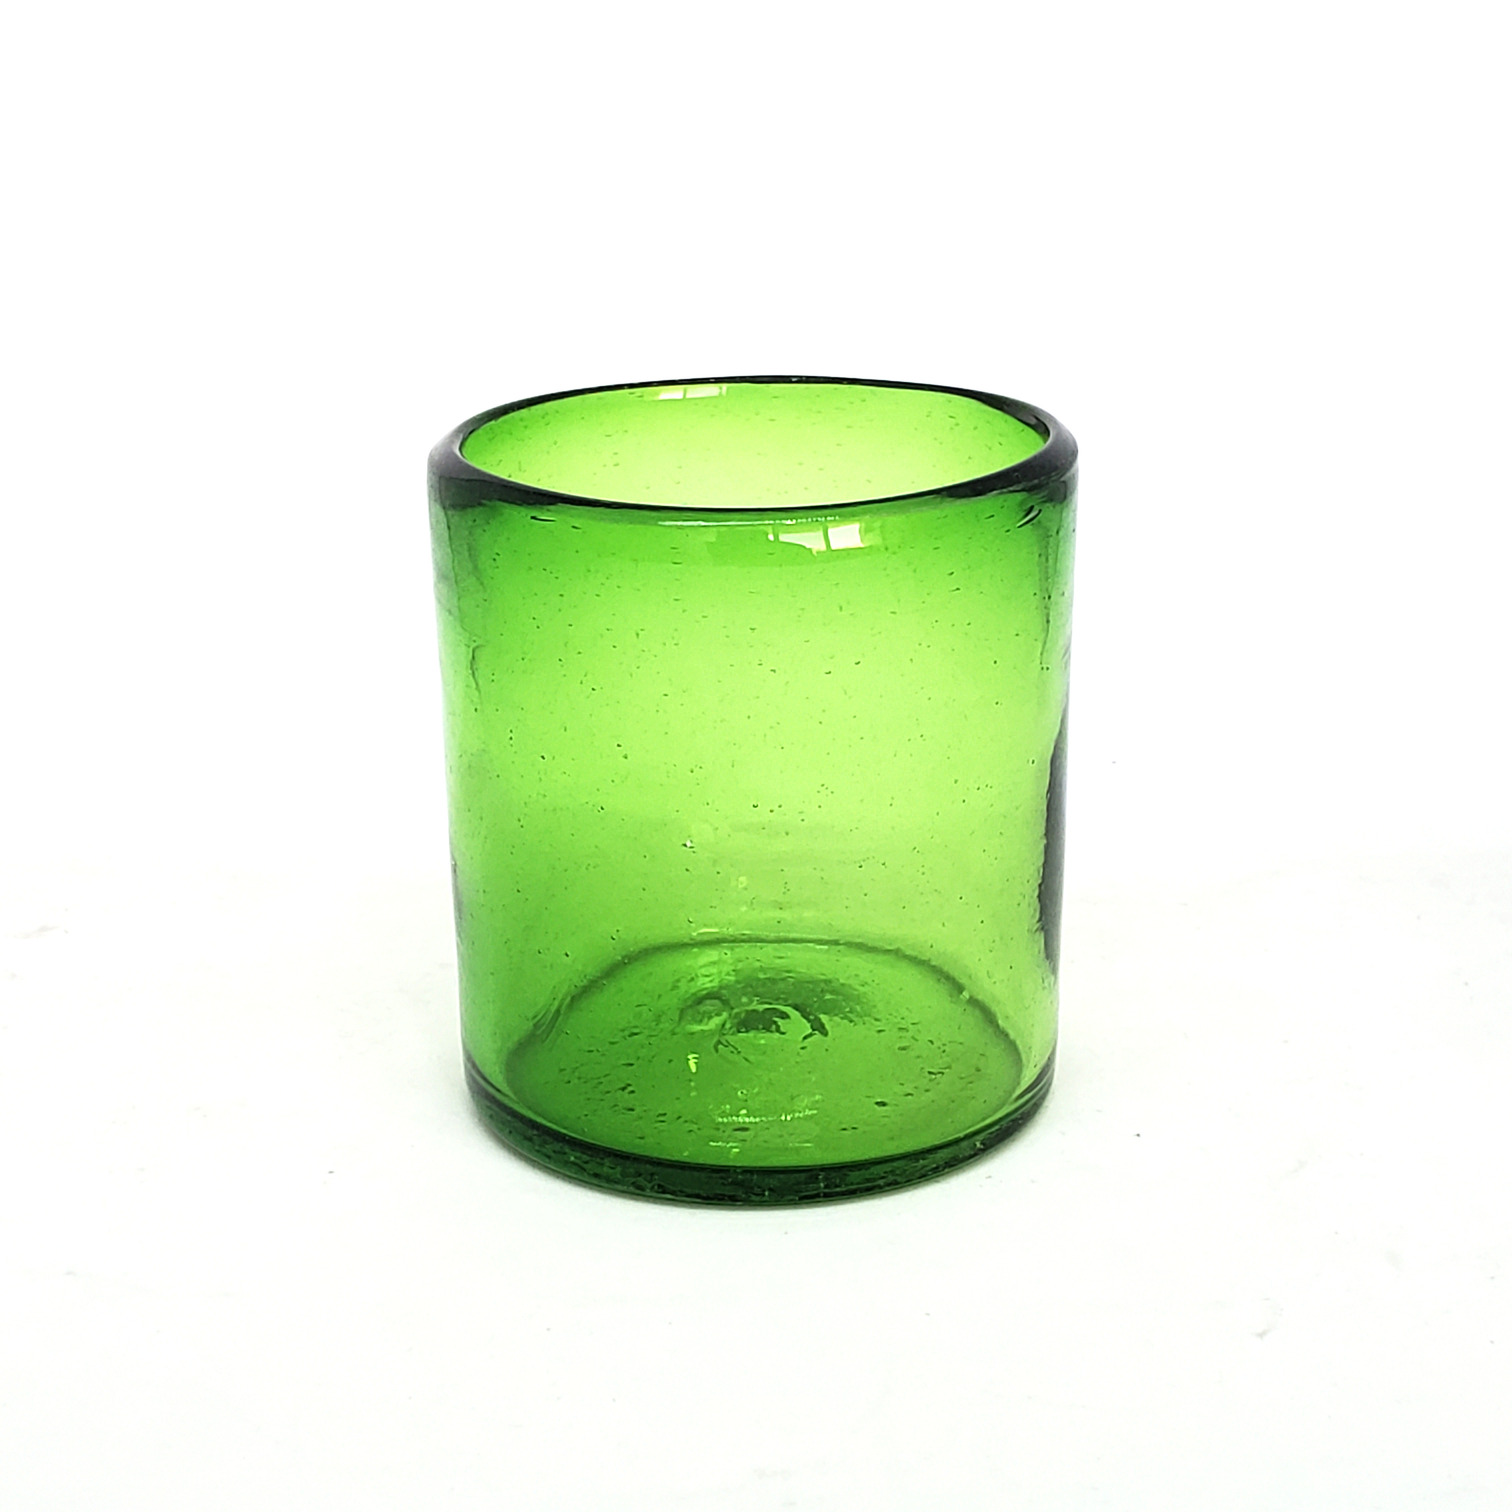 Wholesale MEXICAN GLASSWARE / Solid Emerald Green 9 oz Short Tumblers  / Enhance your favorite drink with these colorful handcrafted glasses.